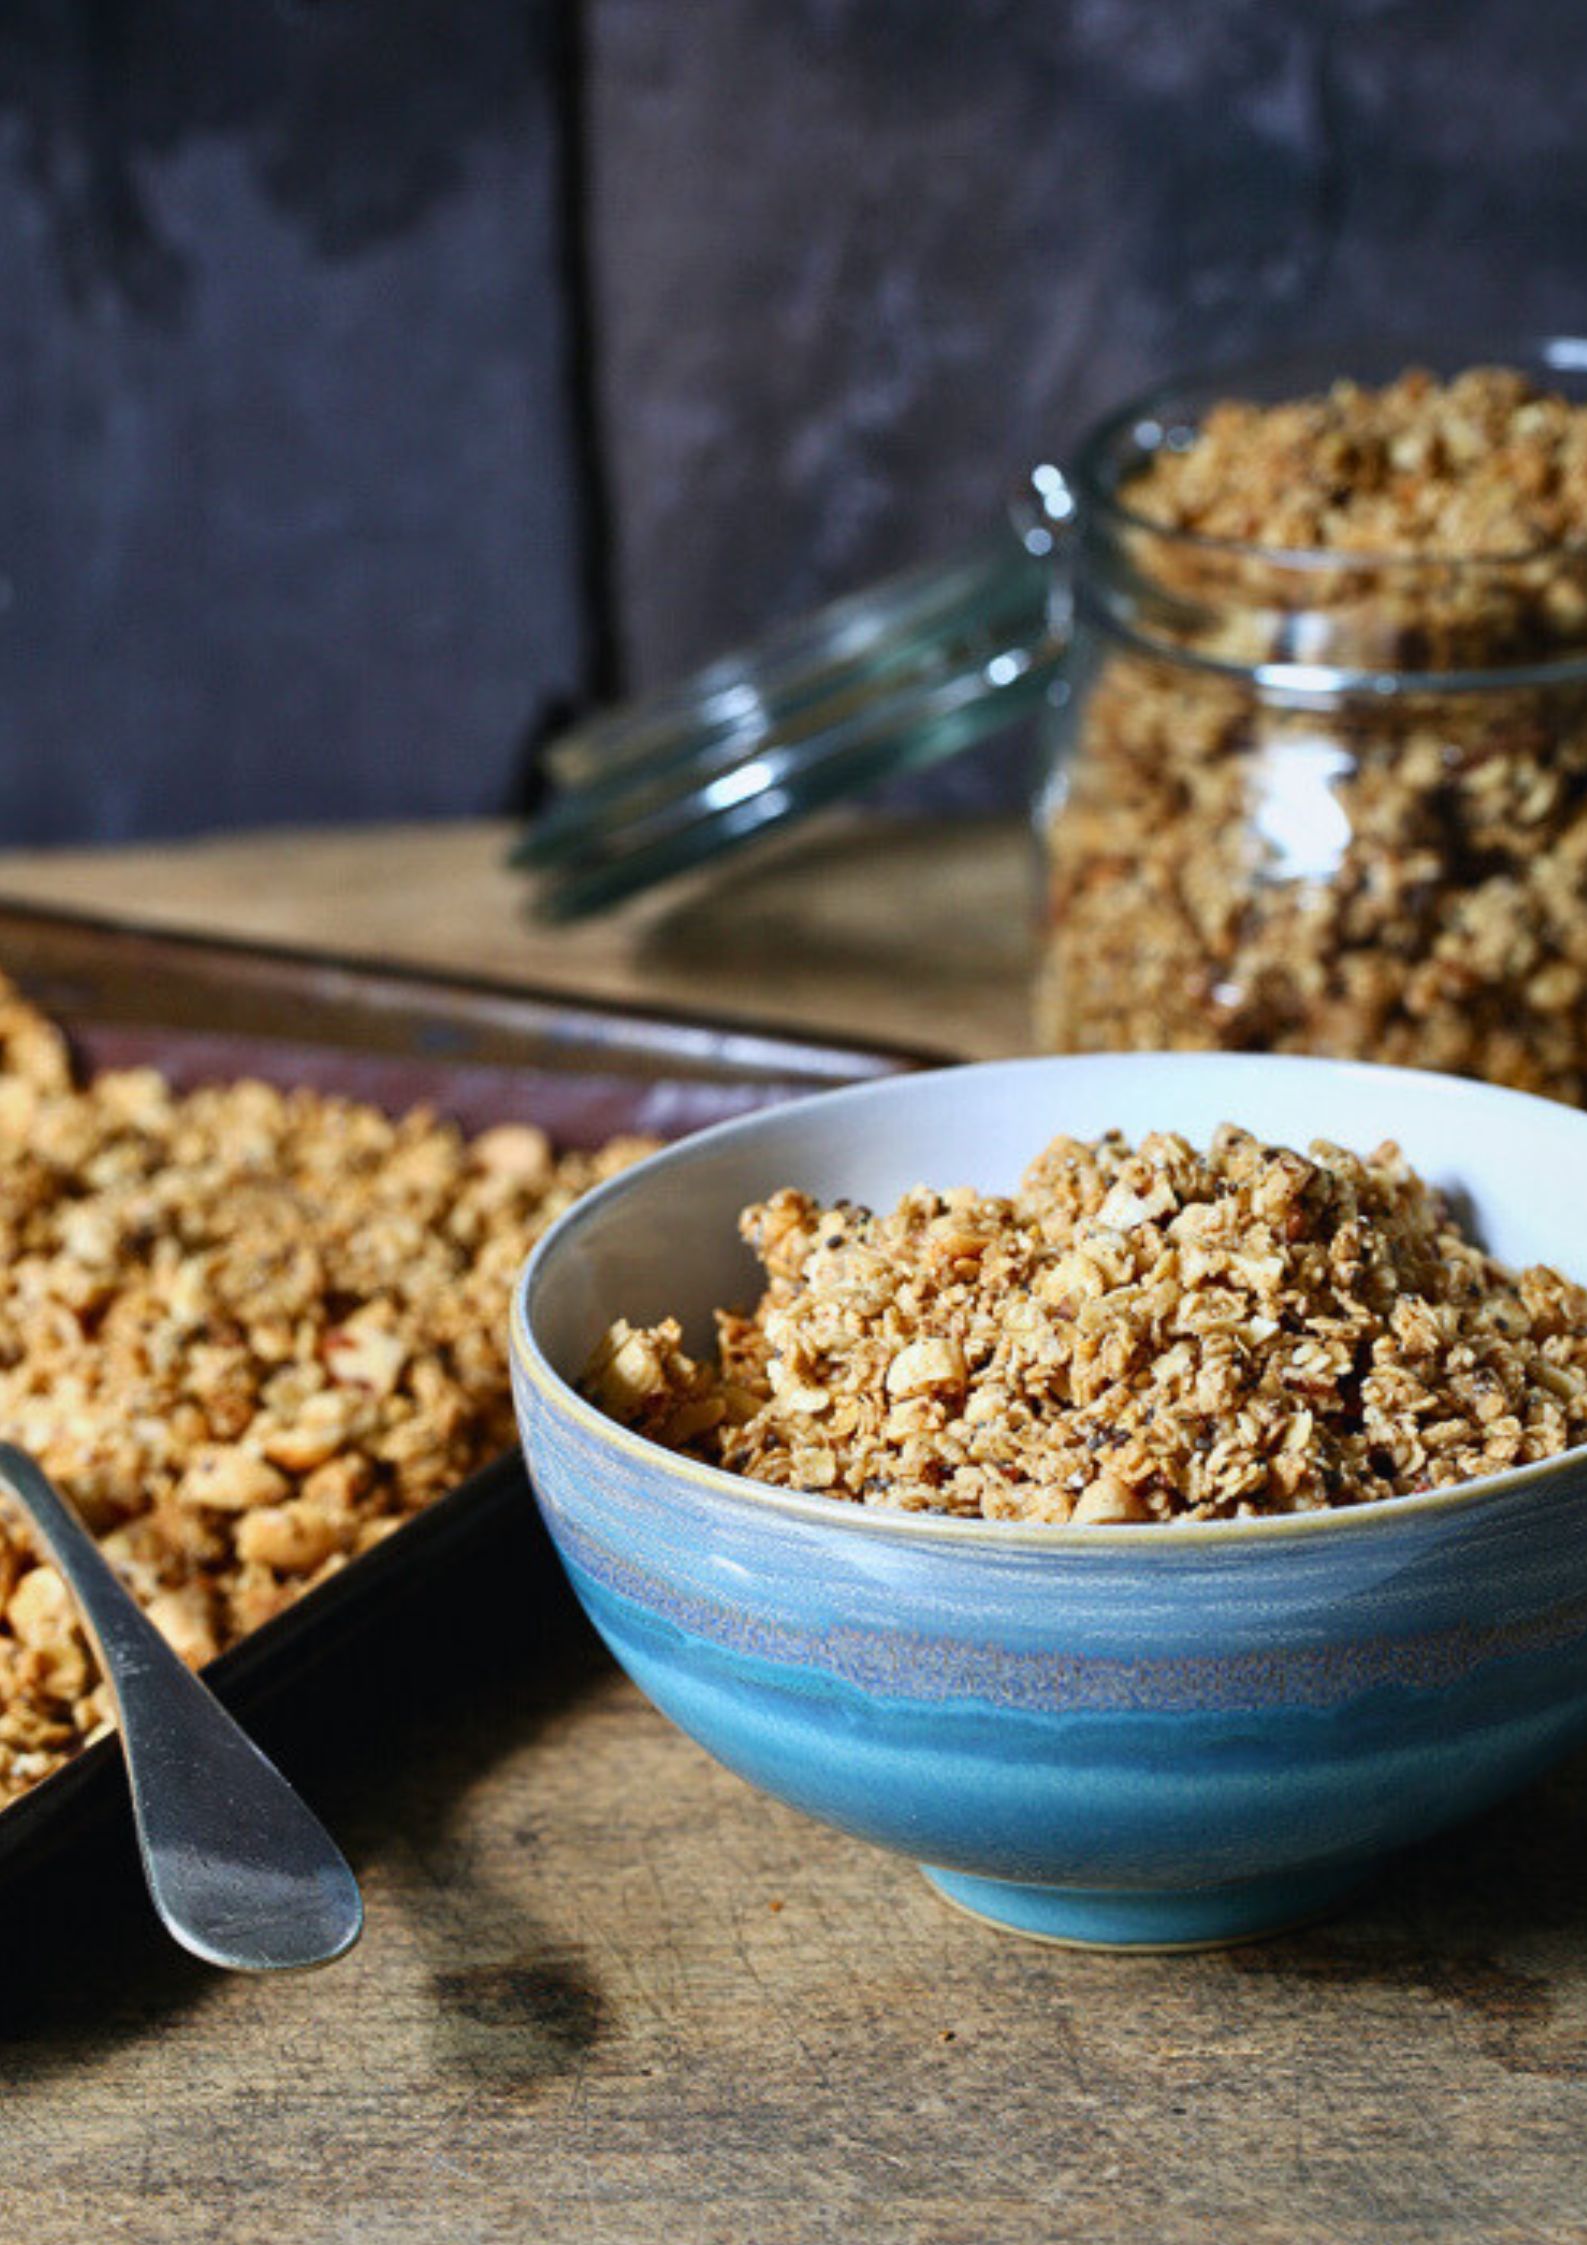 This healthy homemade peanut butter granola loaded with chopped nuts and dark chocolate chips is the perfect make ahead breakfast or quick snack! Sugar free and gluten free too! Recipe on thecookandhim.com | #granola #homemadegranola #healthygranola #sugarfreebreakfast